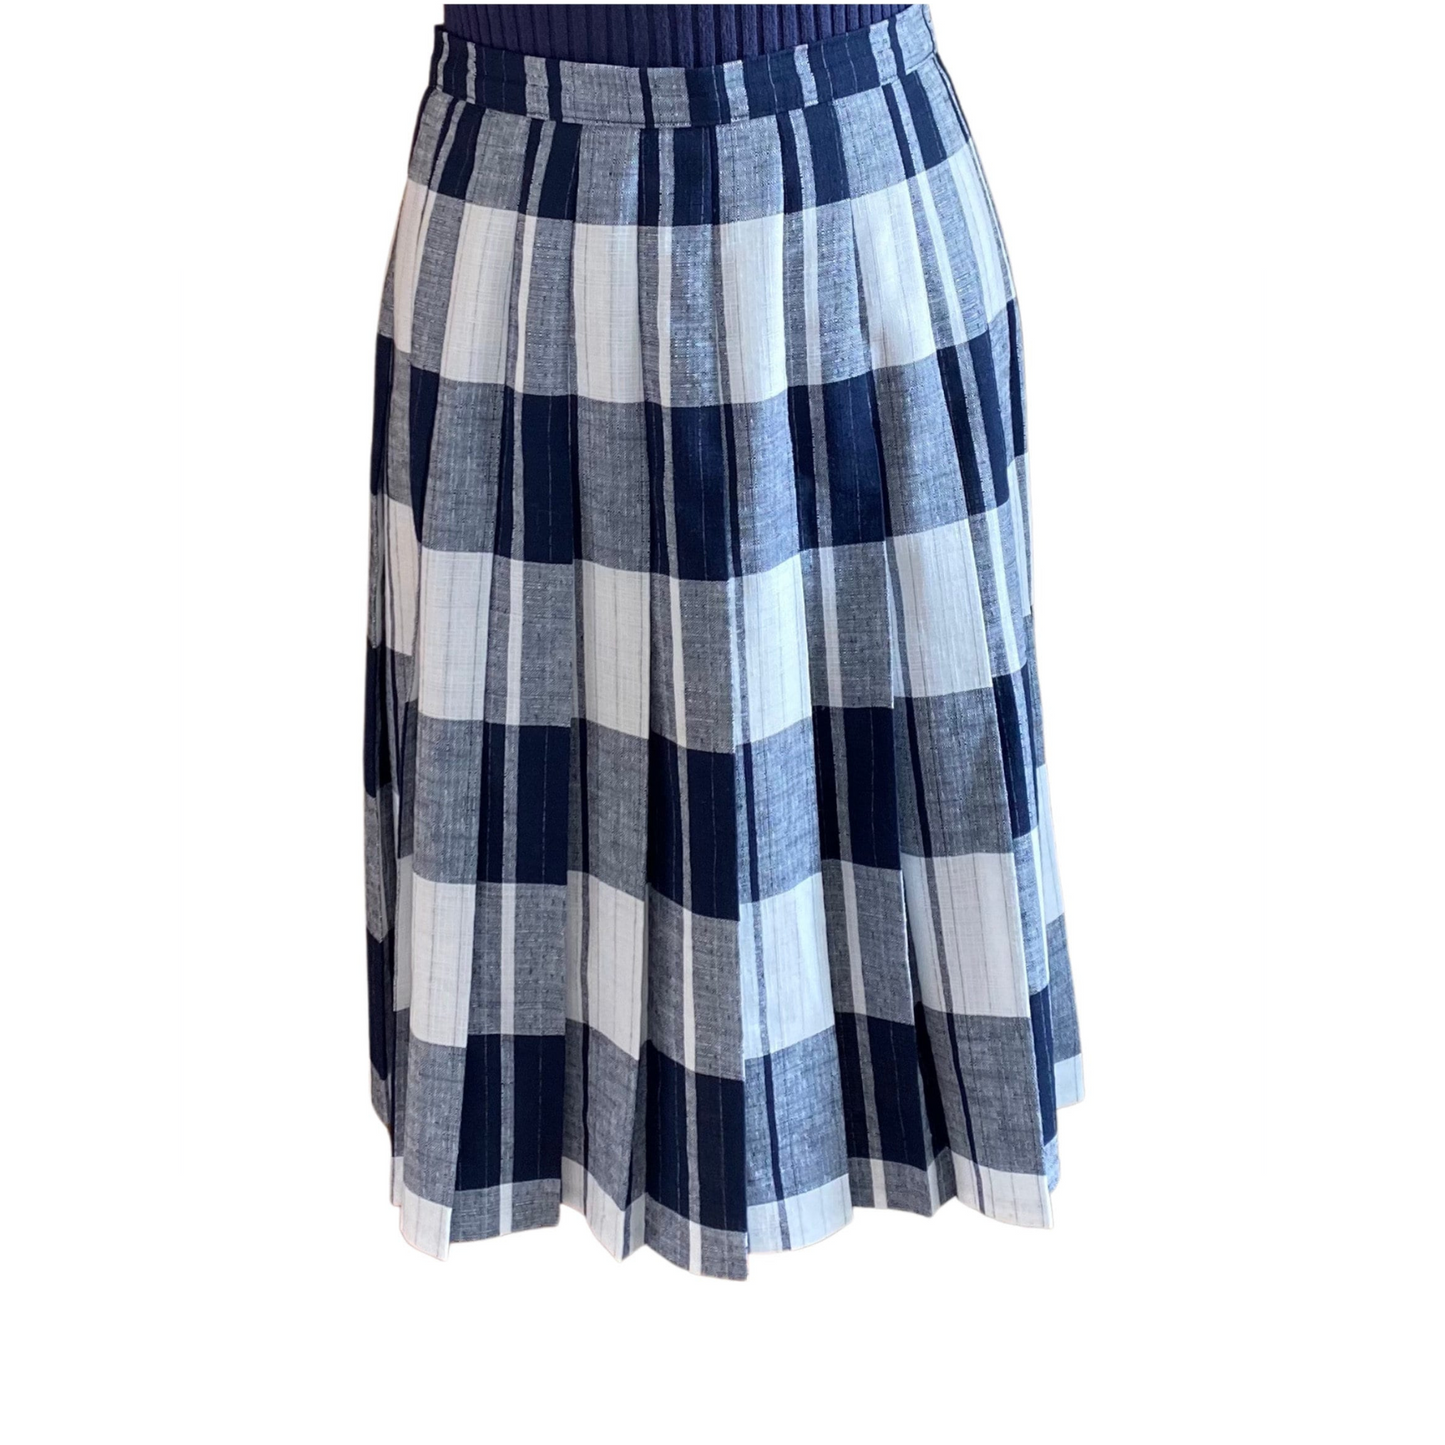 80s blue and white pleated midi skirt by St. Michael.  Approx UK size 8-10